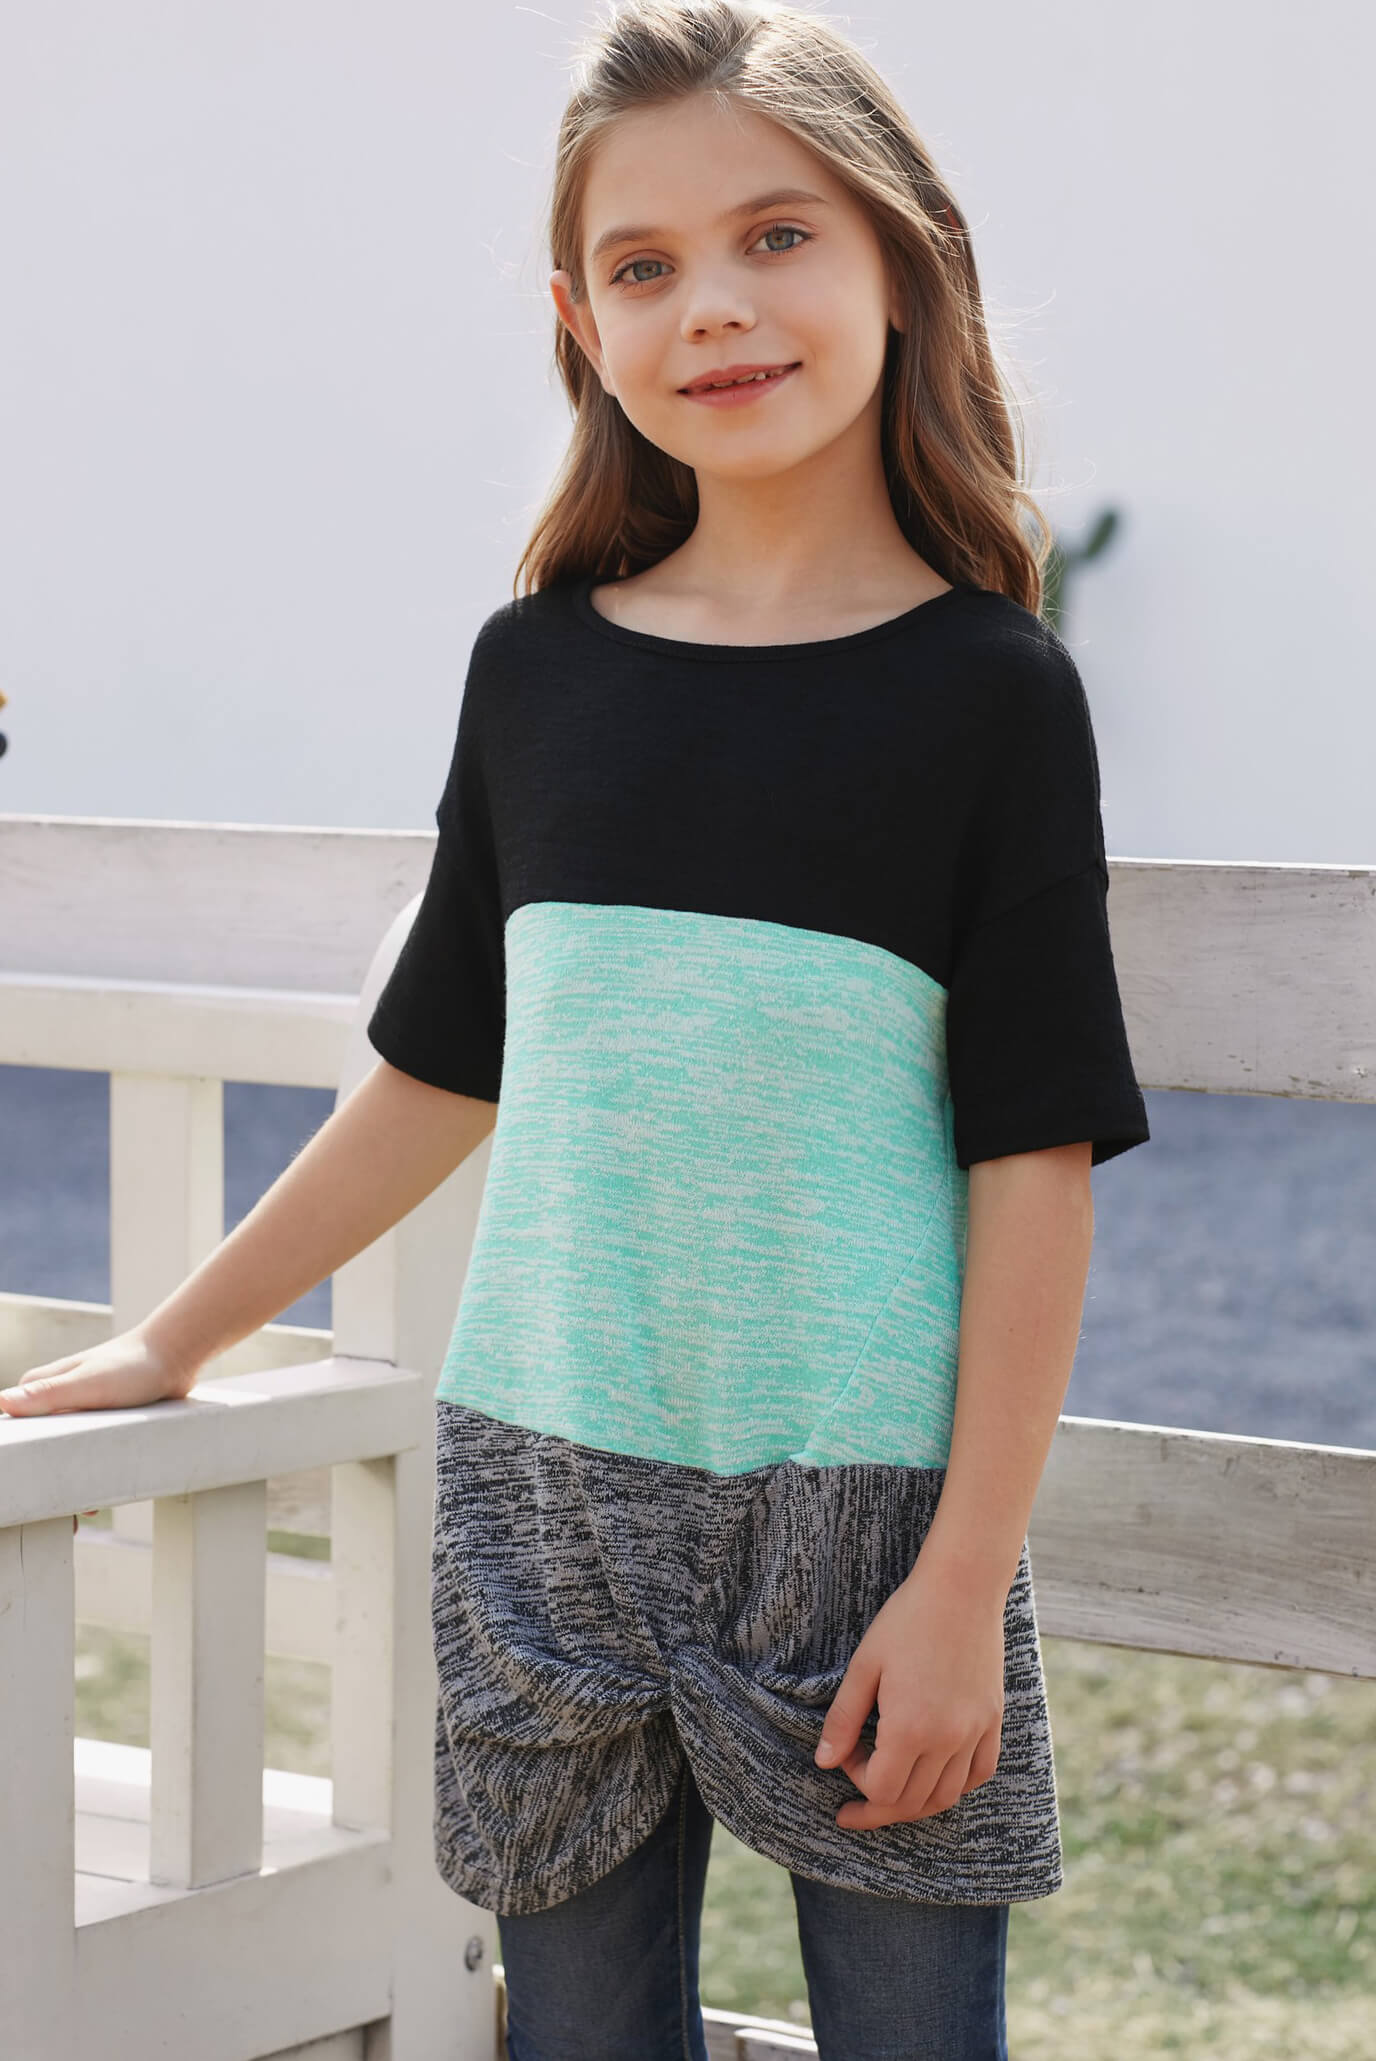 Girls Color Block Twisted Tunic Tee - DromedarShop.com Online Boutique